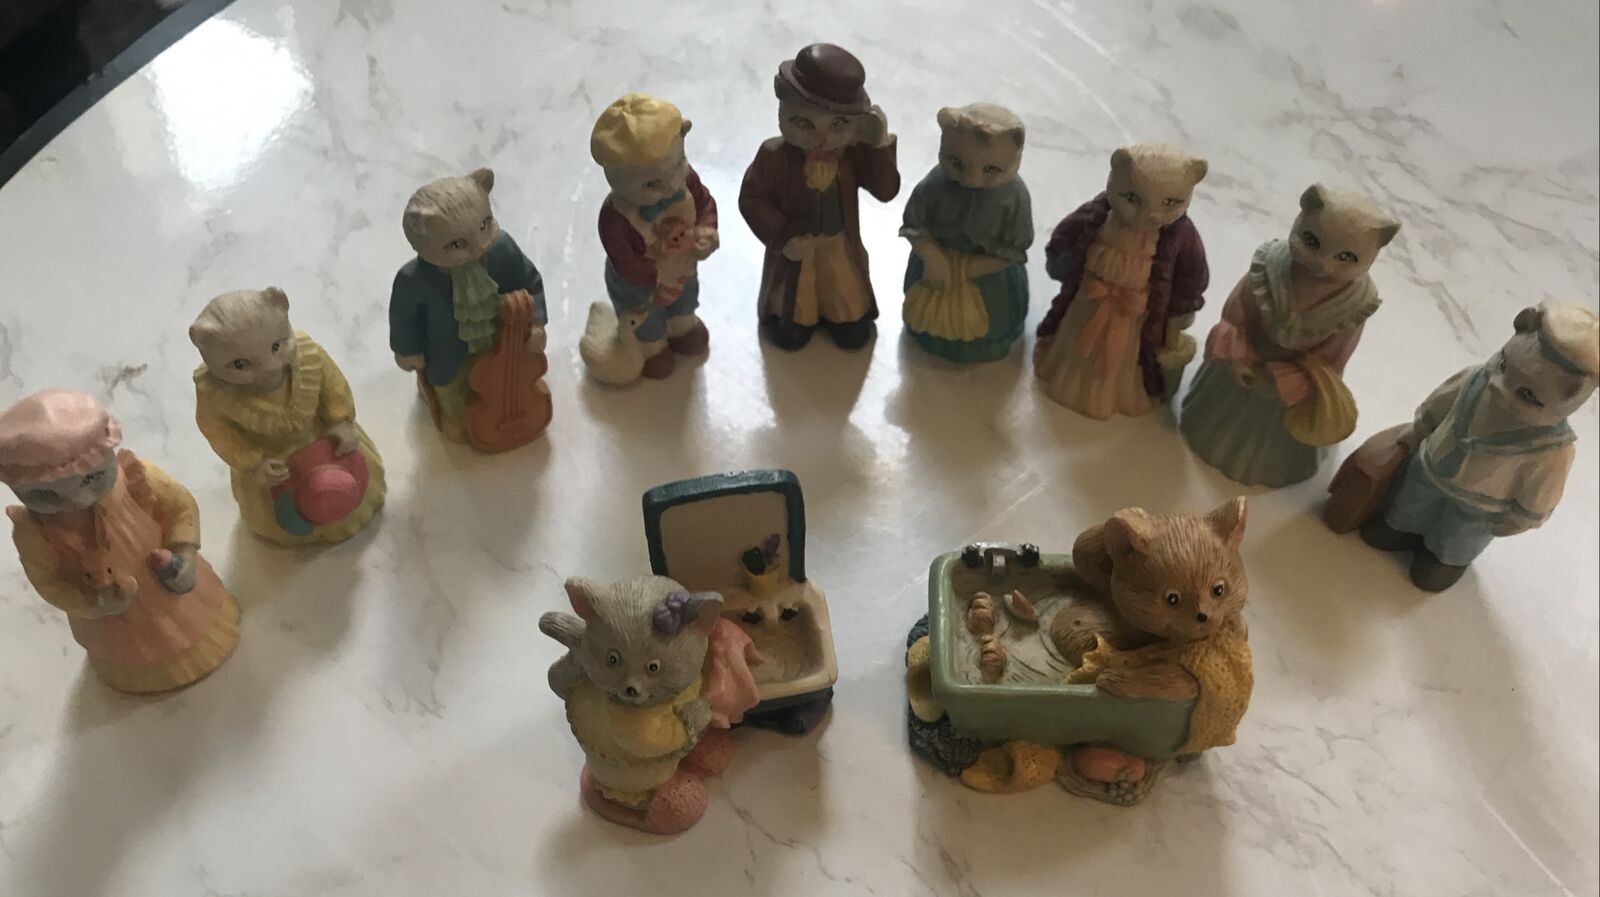 Vintage J.C. KITTEN MINIATURE Figurines 🔥RARE LOT OF 11 🔥 Great Collection 🐈